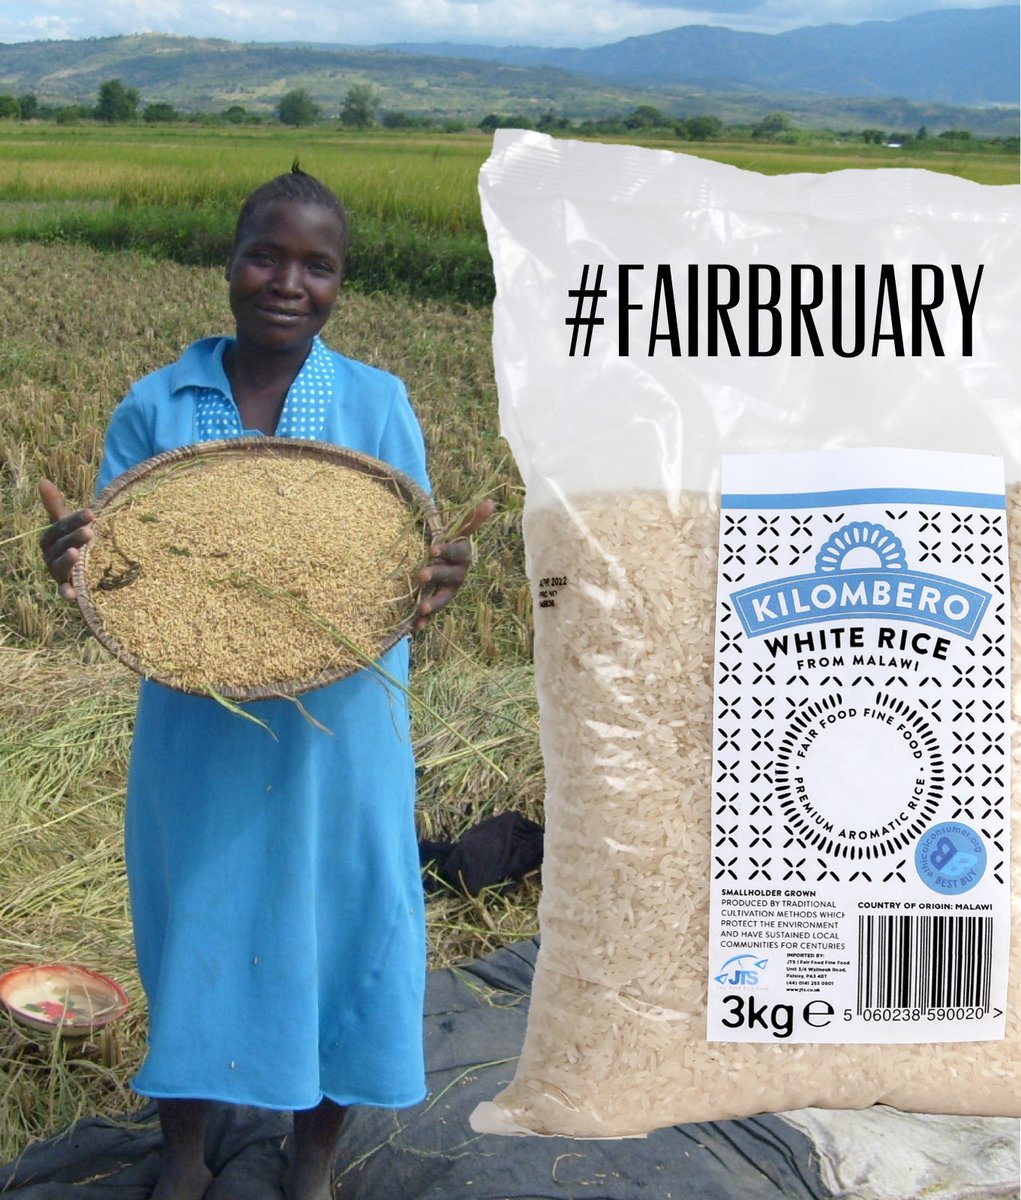 In #Fairbruary we celebrate #FairTrade products and producers in the global south. We’re starting with our award-winning Kilombero Rice from Malawi. Choosing this rice ensures growers get a fair deal and you get a great quality product. Ask for it at your local Fair Trade shop.